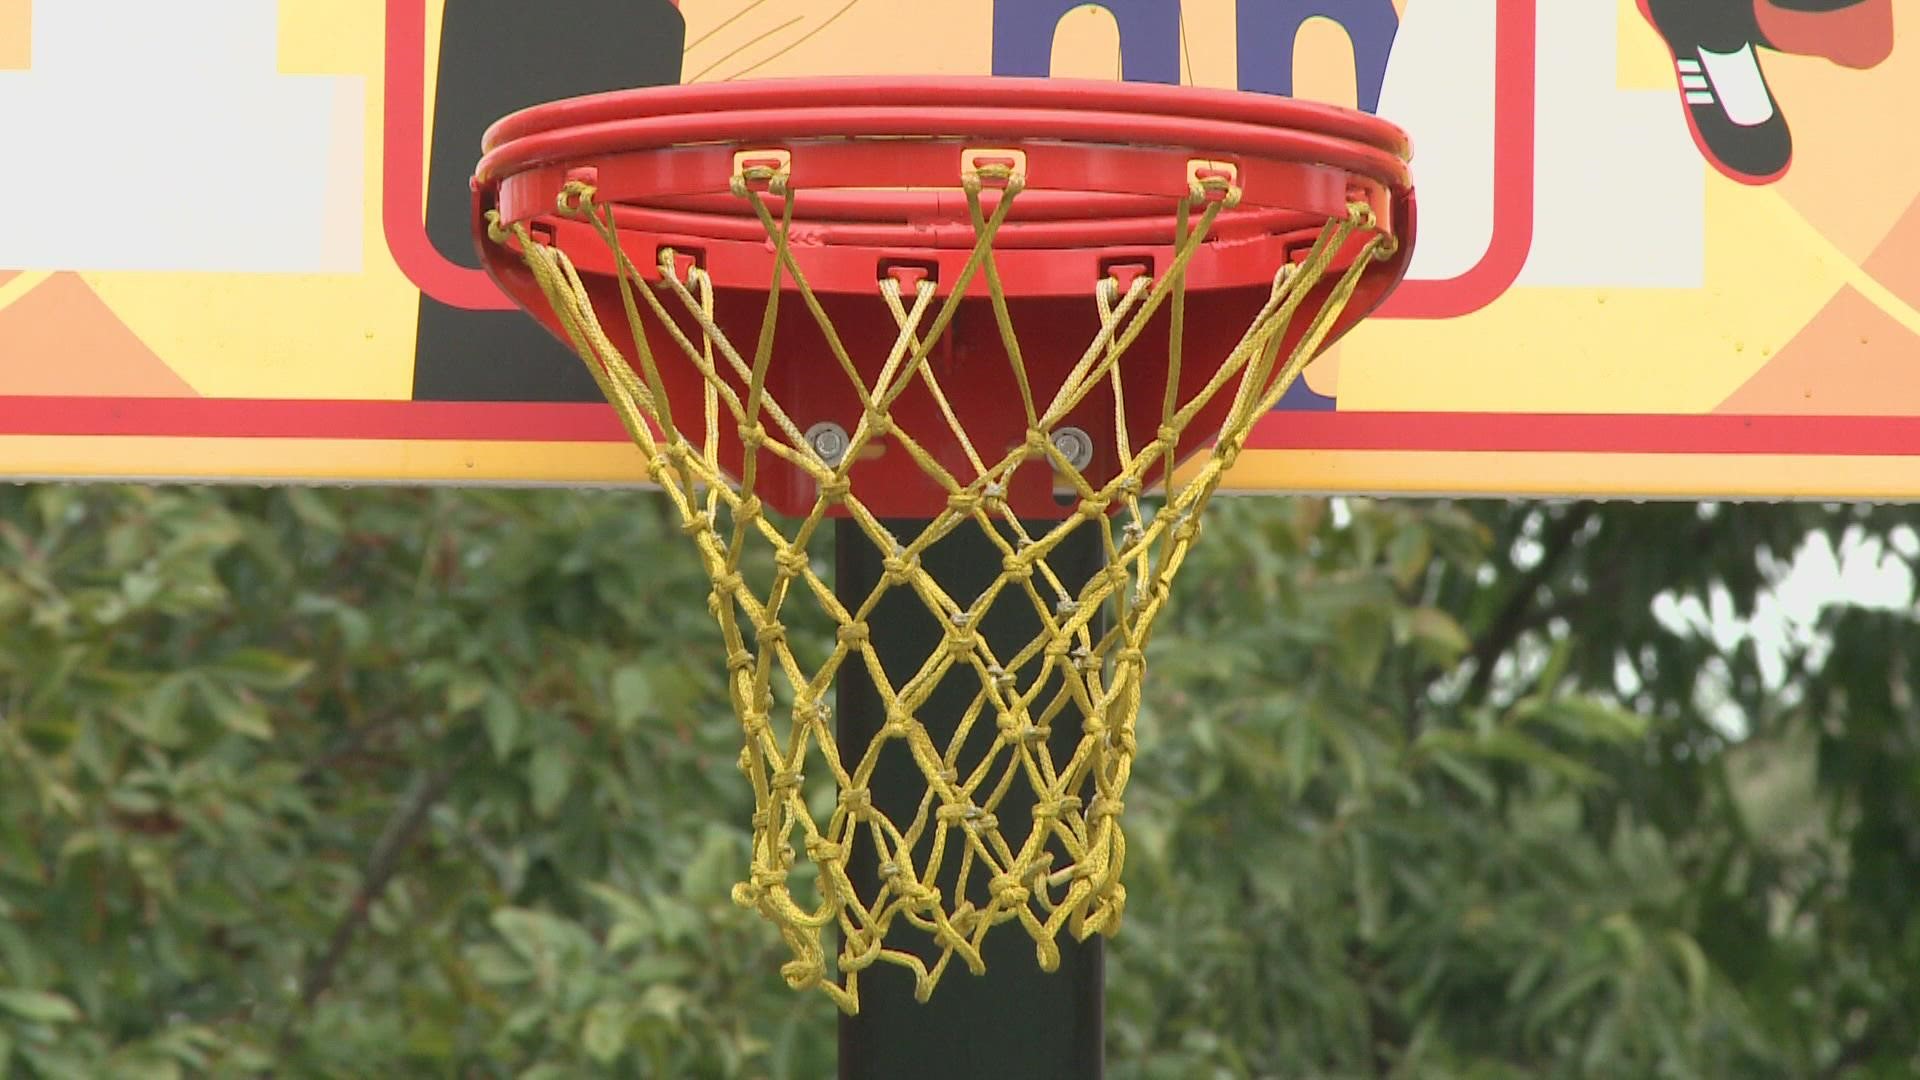 New backboards in Sheppard Park pay tribute to Louisville’s basketball legacy and connection to the McDonald’s All American Games.